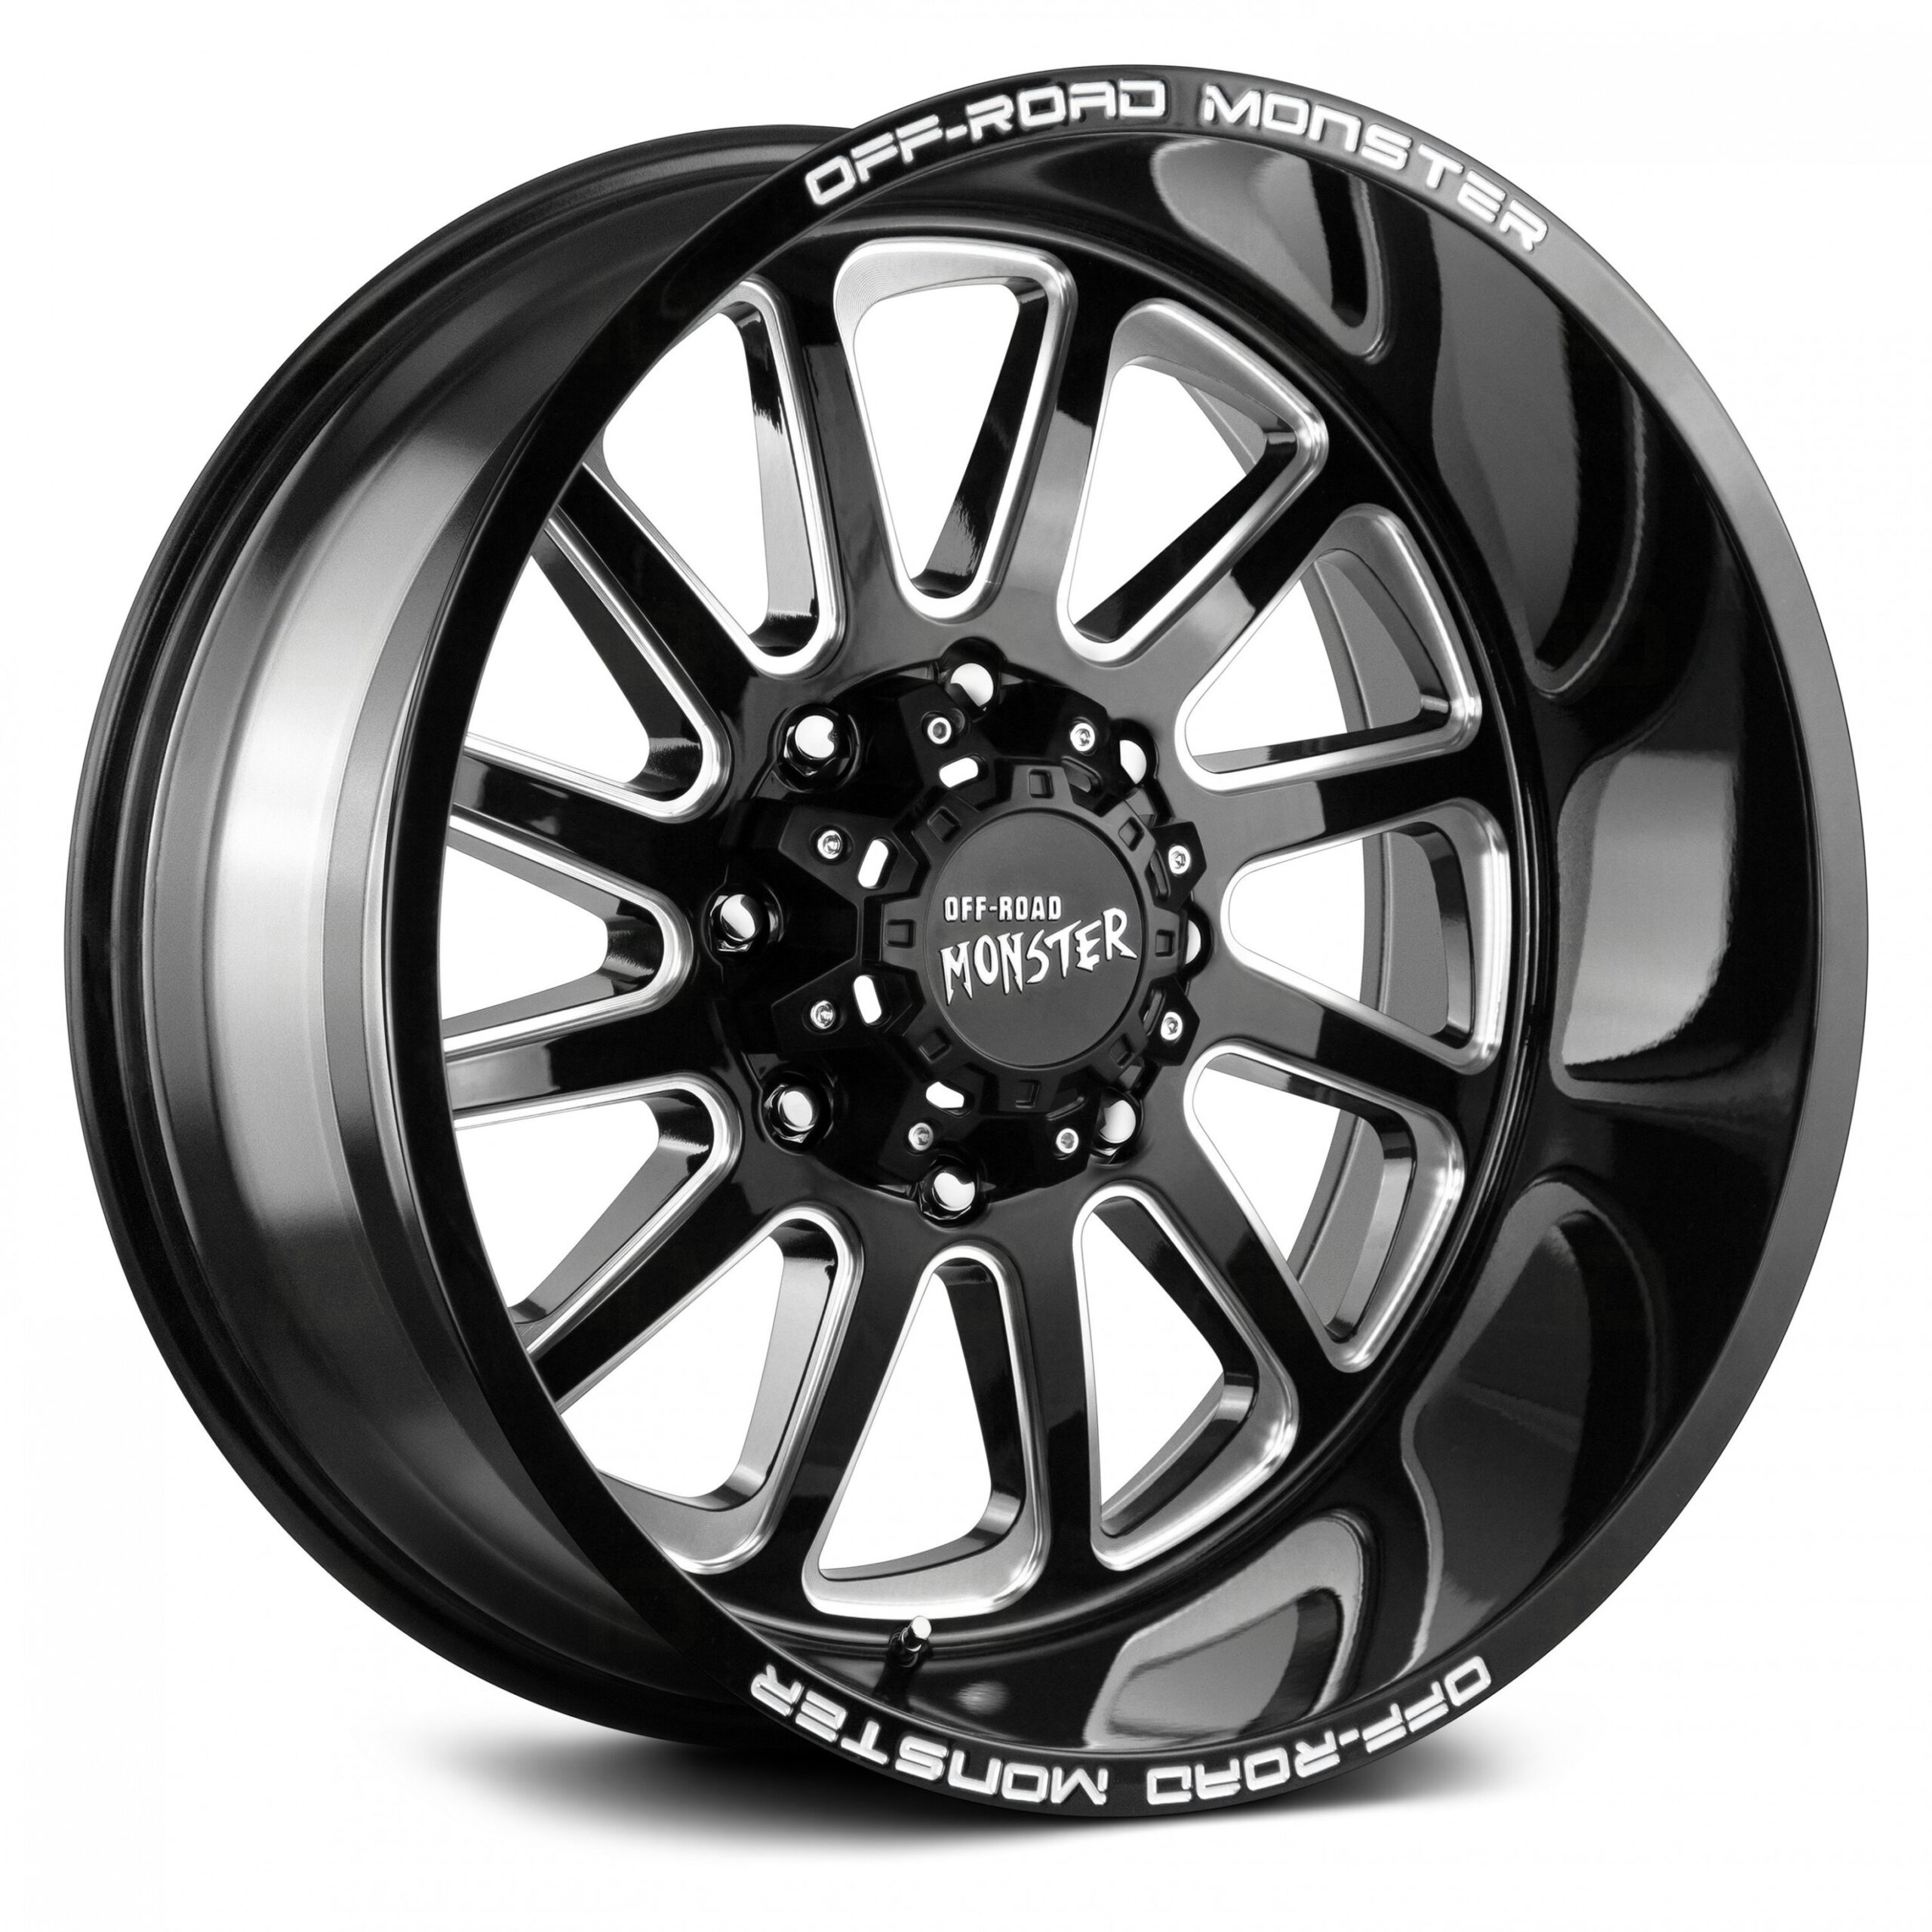 OFF-ROAD MONSTER® M4 Wheels - Gloss Black with Milled Accents Rims - off road monster wheels